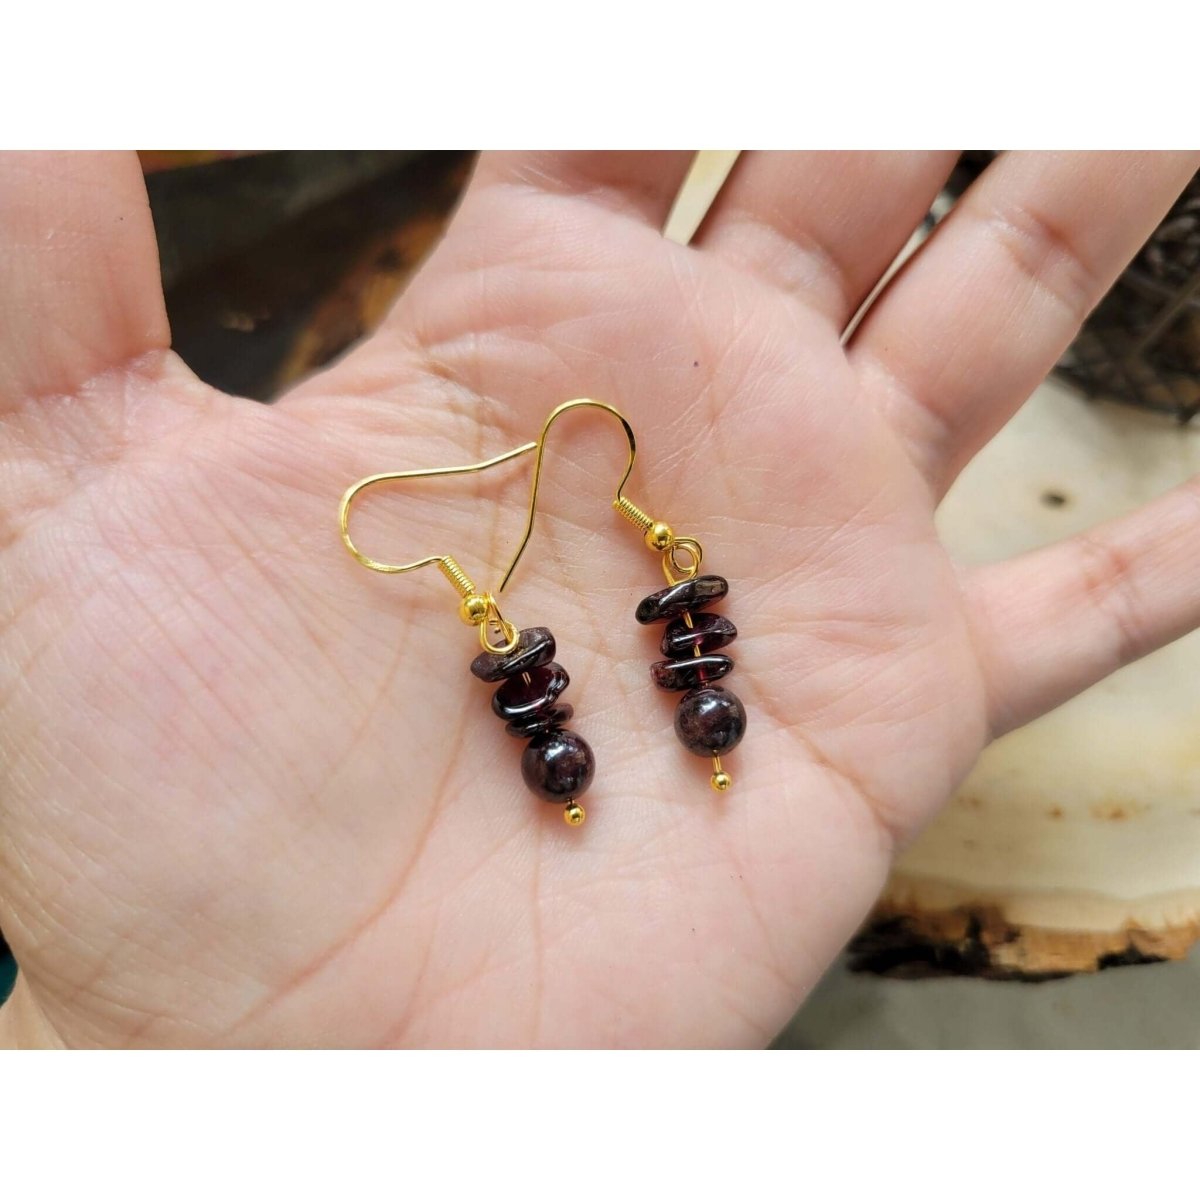 New!!! Charms Crystal Earrings ,stacked Stone Drop Earrings |Charm and Crystal Earrings ,Witch Jewelry, Healing Crystal Energy My Magic Place Shop